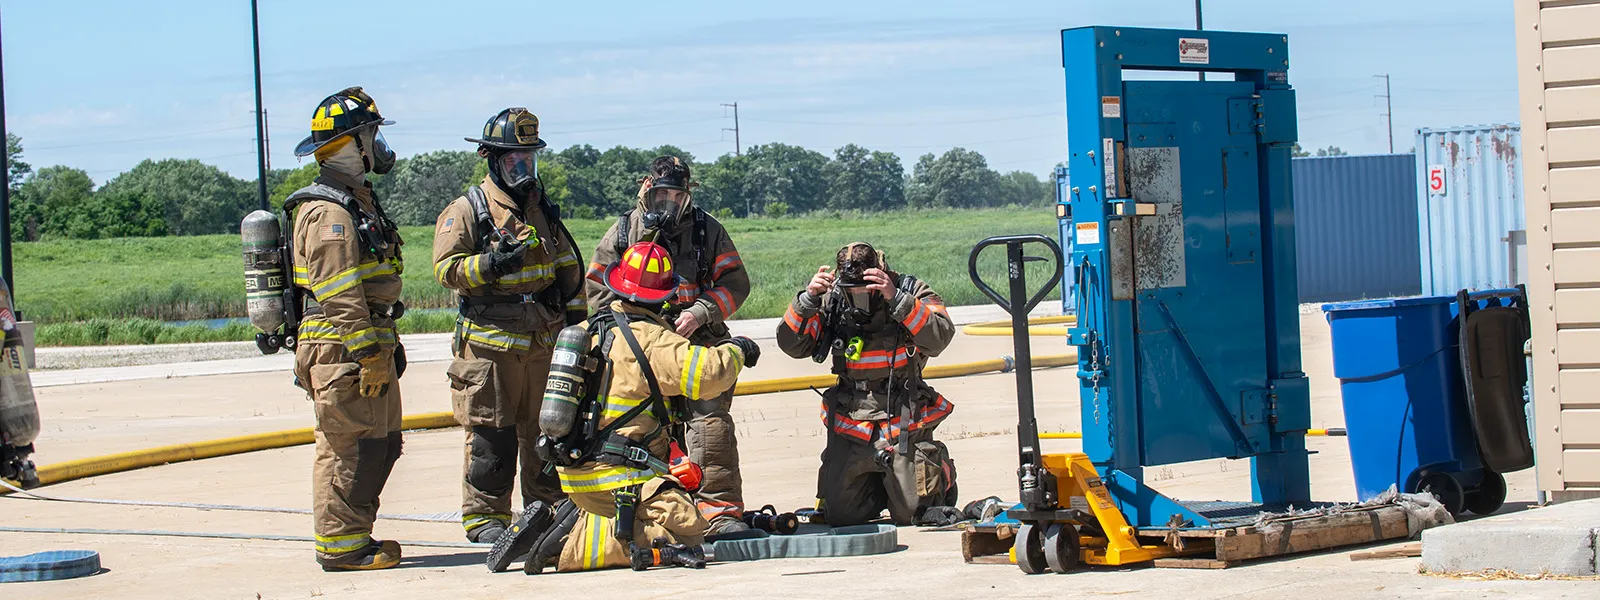 A group of Firefighters training by putting on equipment and ensuring the hose works